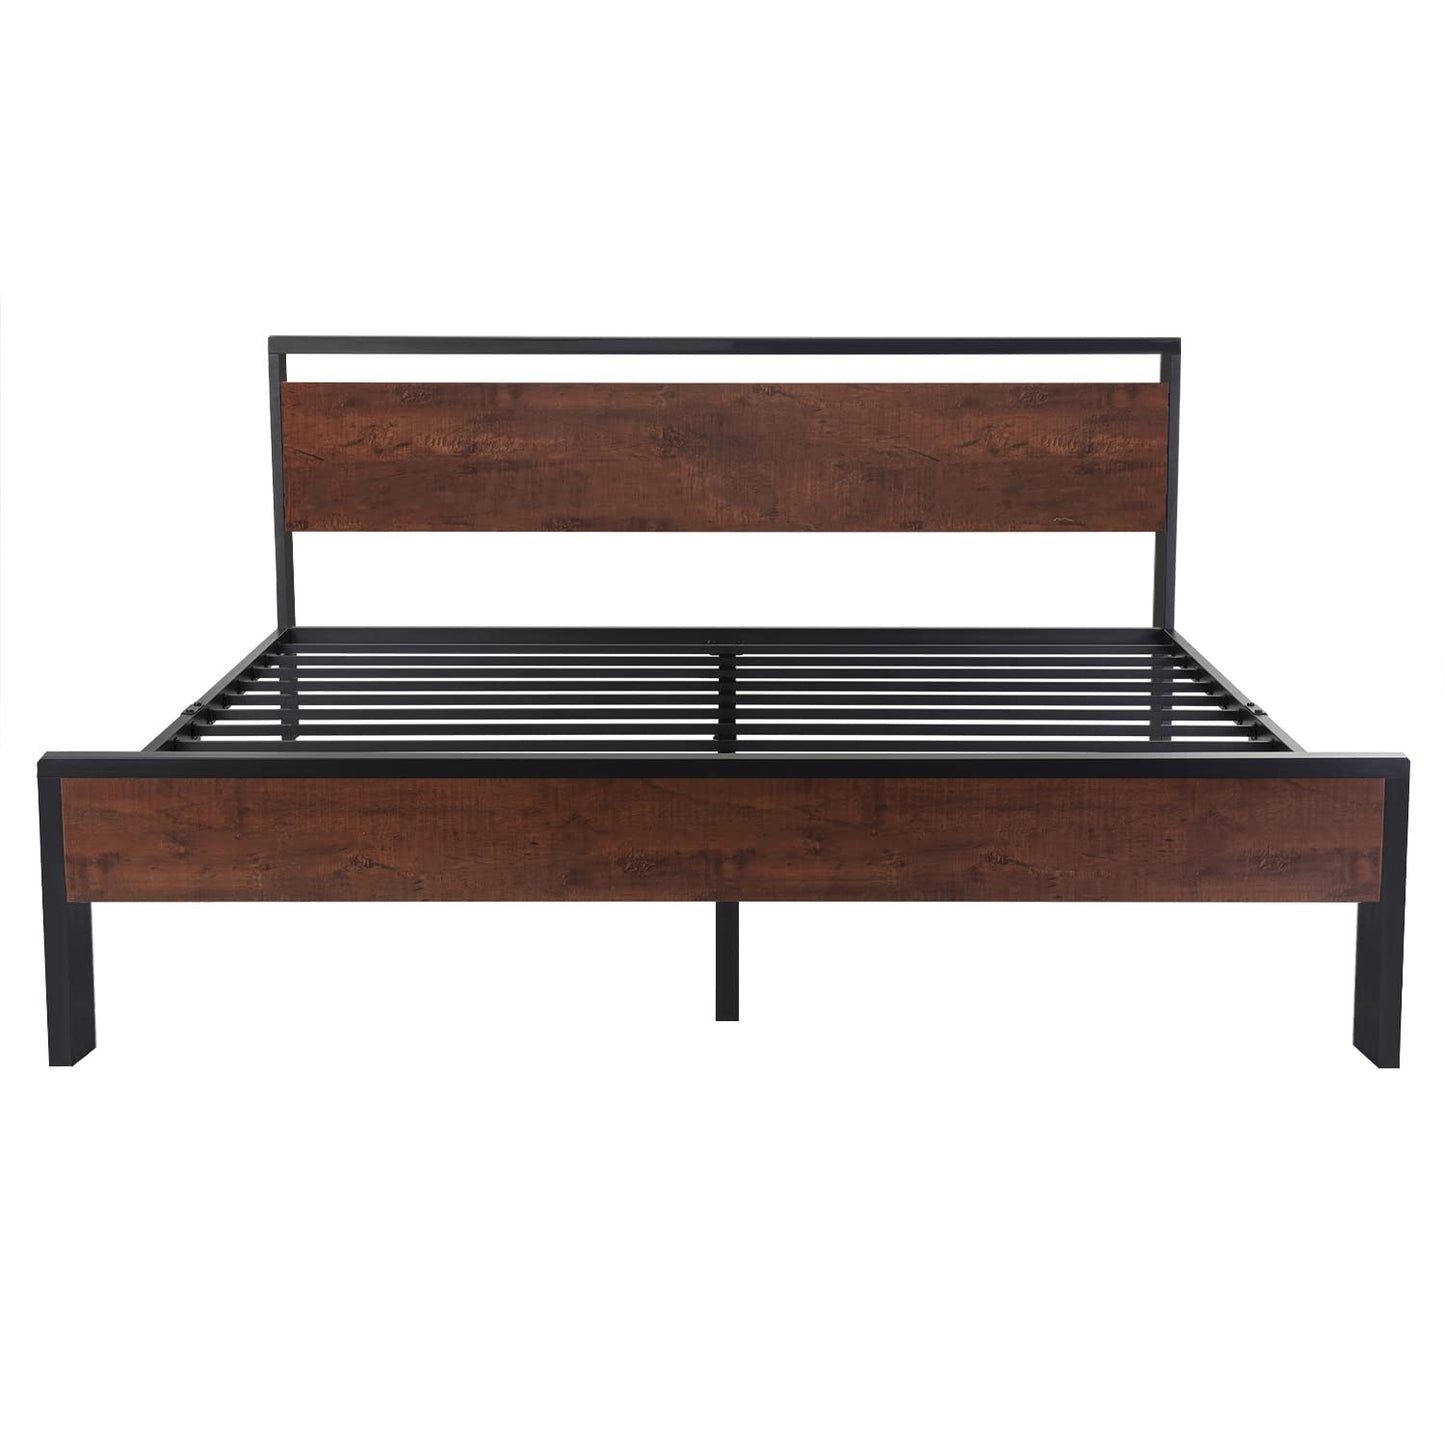 Allewie King Size Platform Bed Frame with Wooden Headboard and Footboard, Heavy Duty 12 Metal Slats Support, No Box Spring Needed, Under Bed Storage,